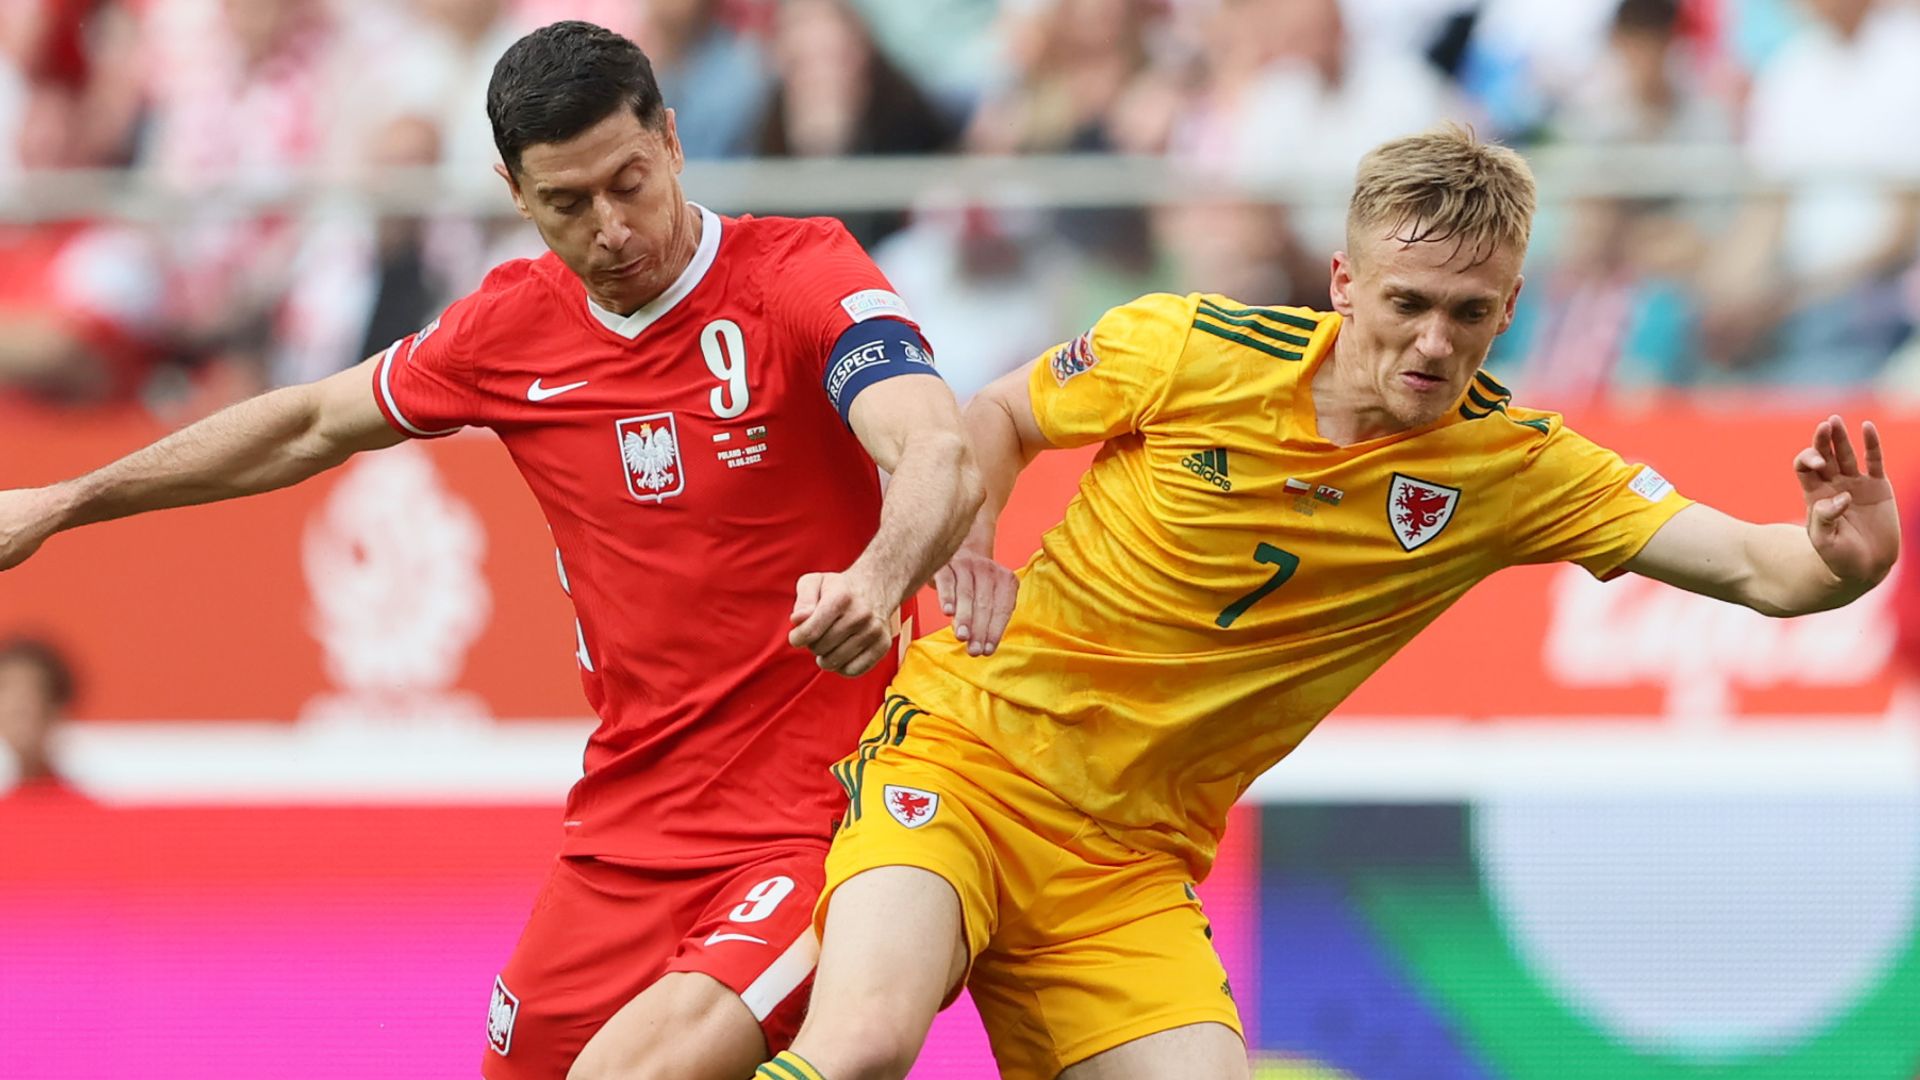 Poland 2-1 Wales: Poland comeback to inflict defeat on Welsh in Nations League opener